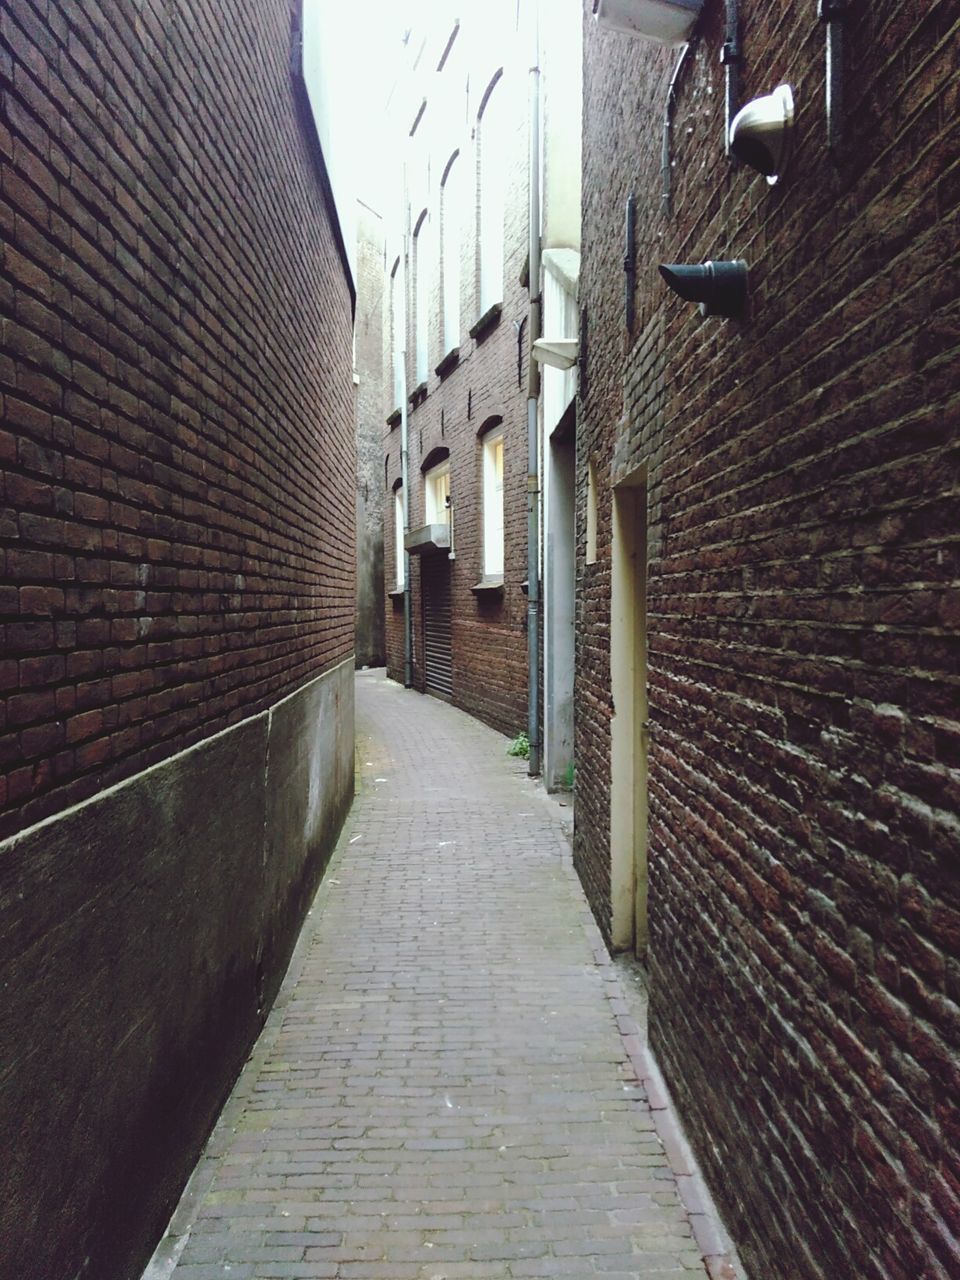 architecture, building exterior, built structure, the way forward, cobblestone, diminishing perspective, narrow, alley, walkway, house, residential structure, vanishing point, brick wall, street, building, residential building, pathway, footpath, long, wall - building feature